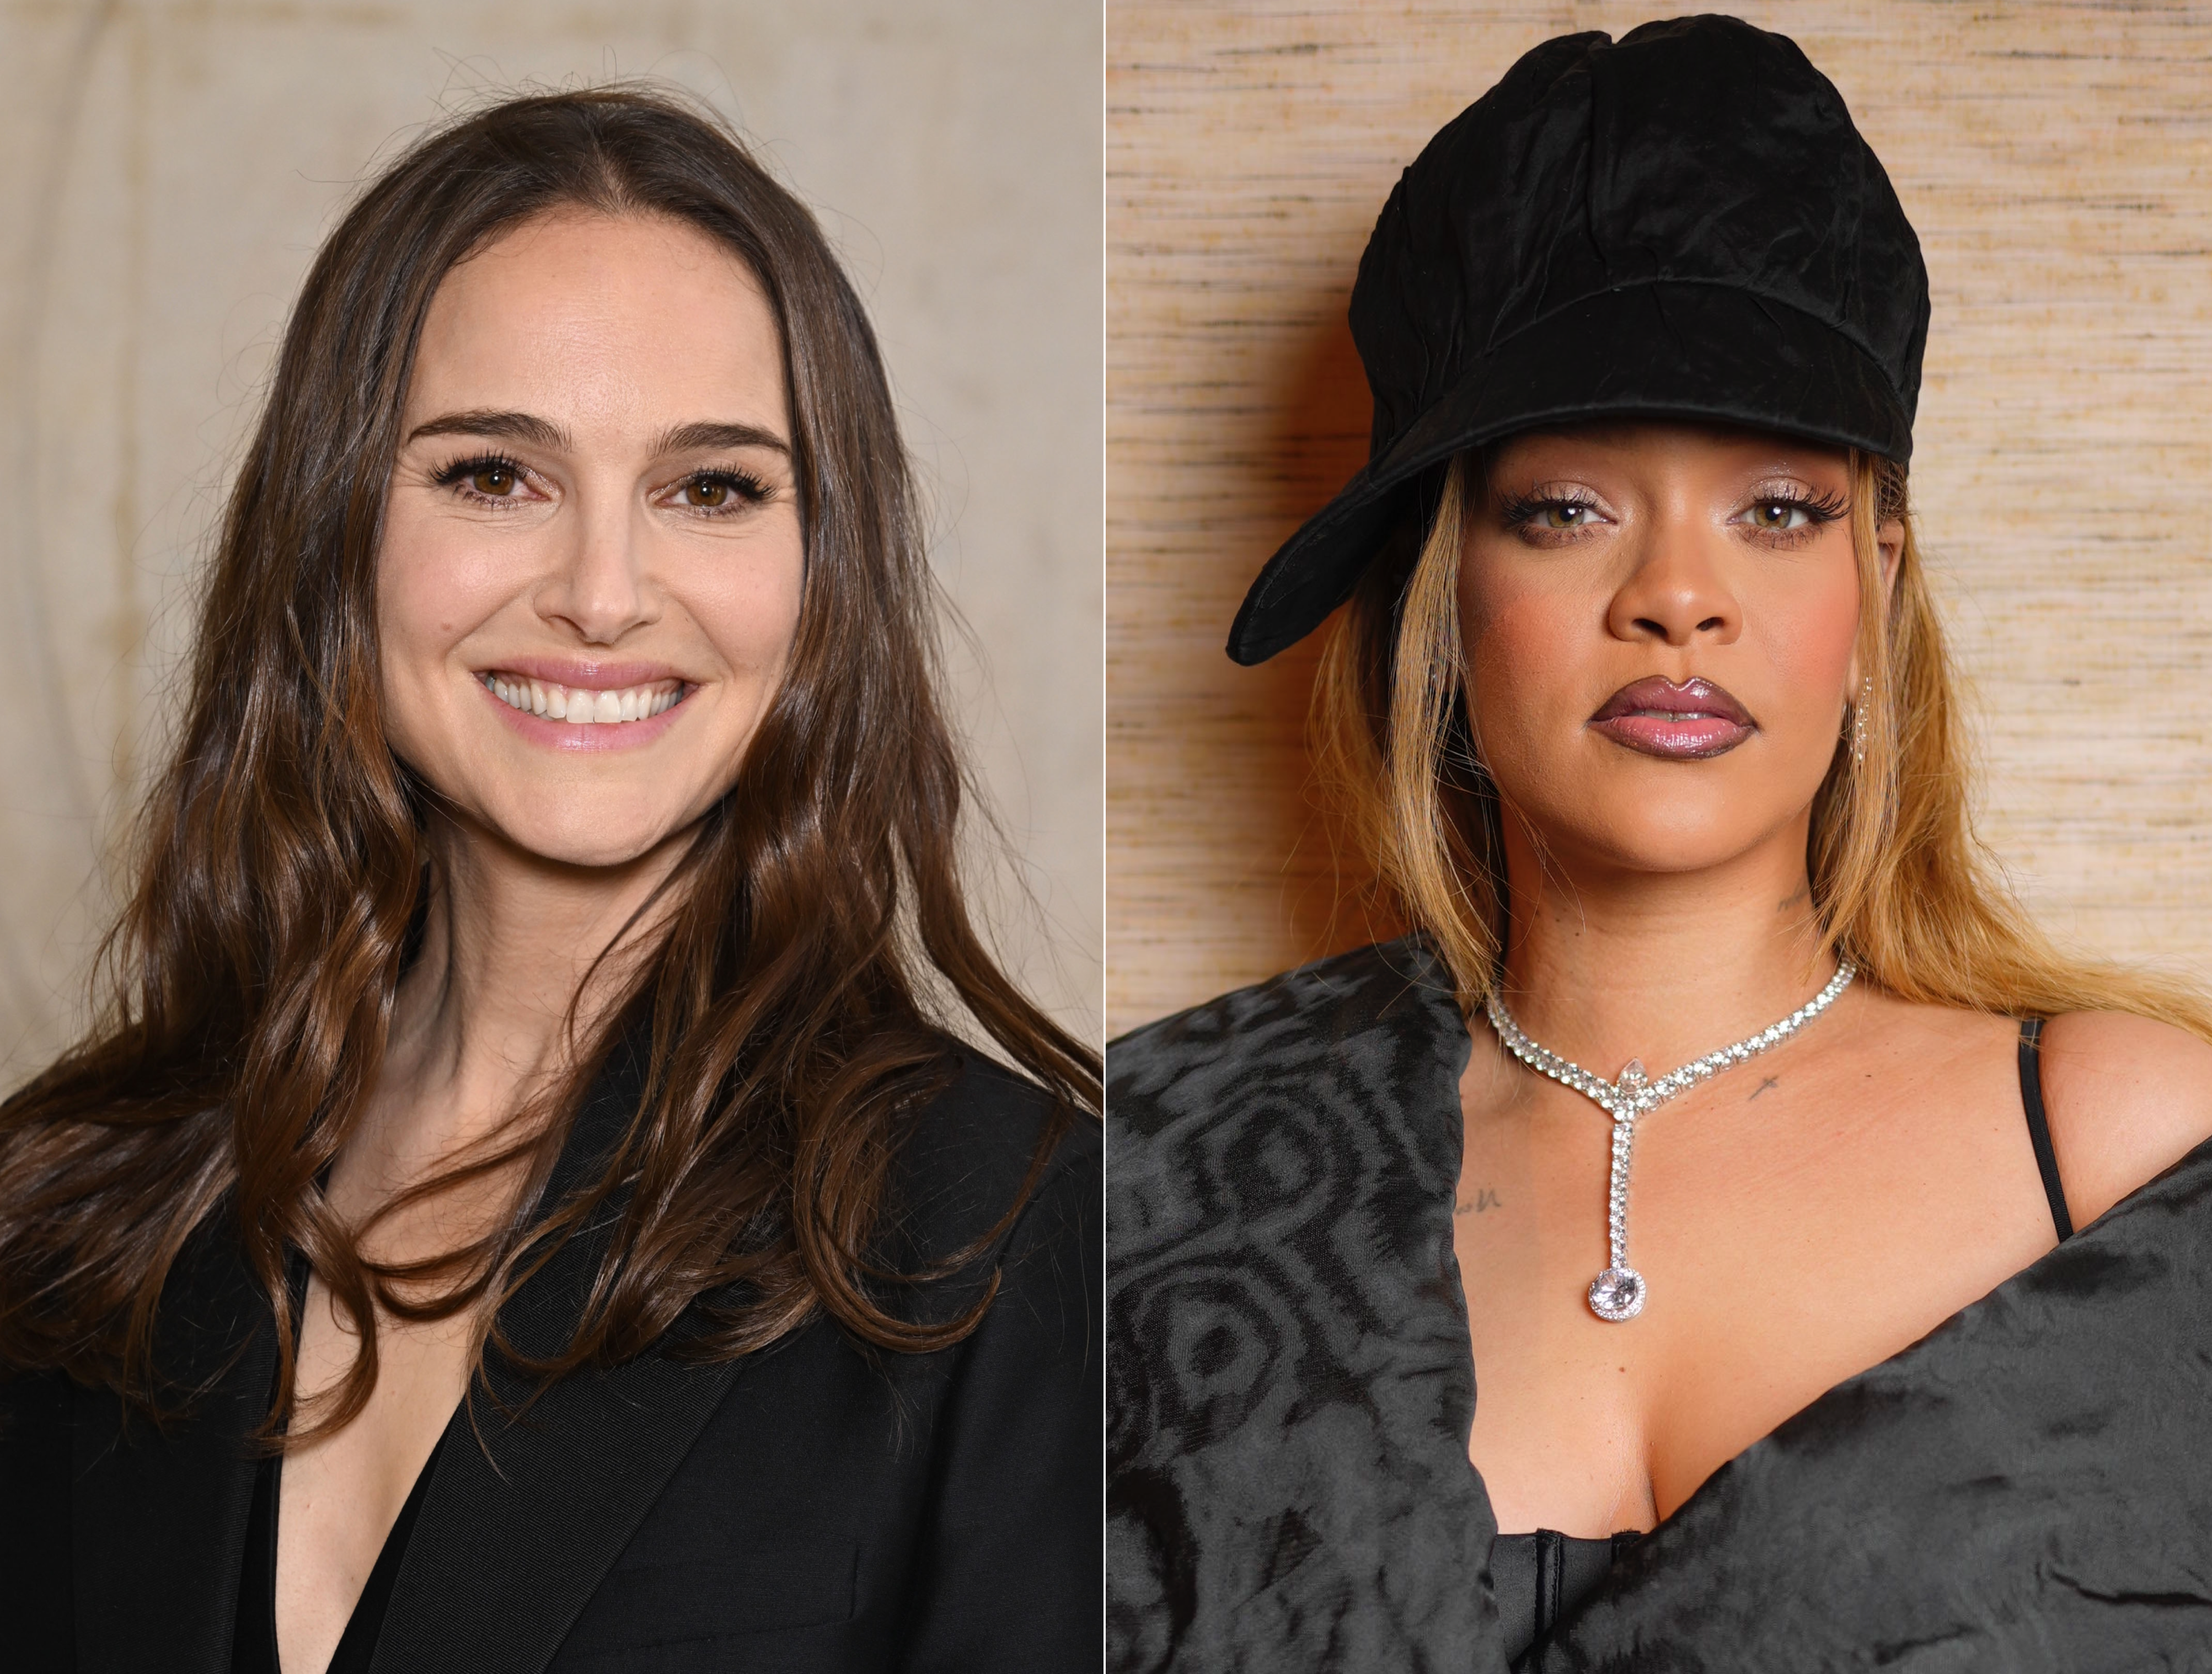 Natalie Portman Says Rihanna's ‘Bad Bitch’ Compliment Was Just What She Needed Mid-Divorce